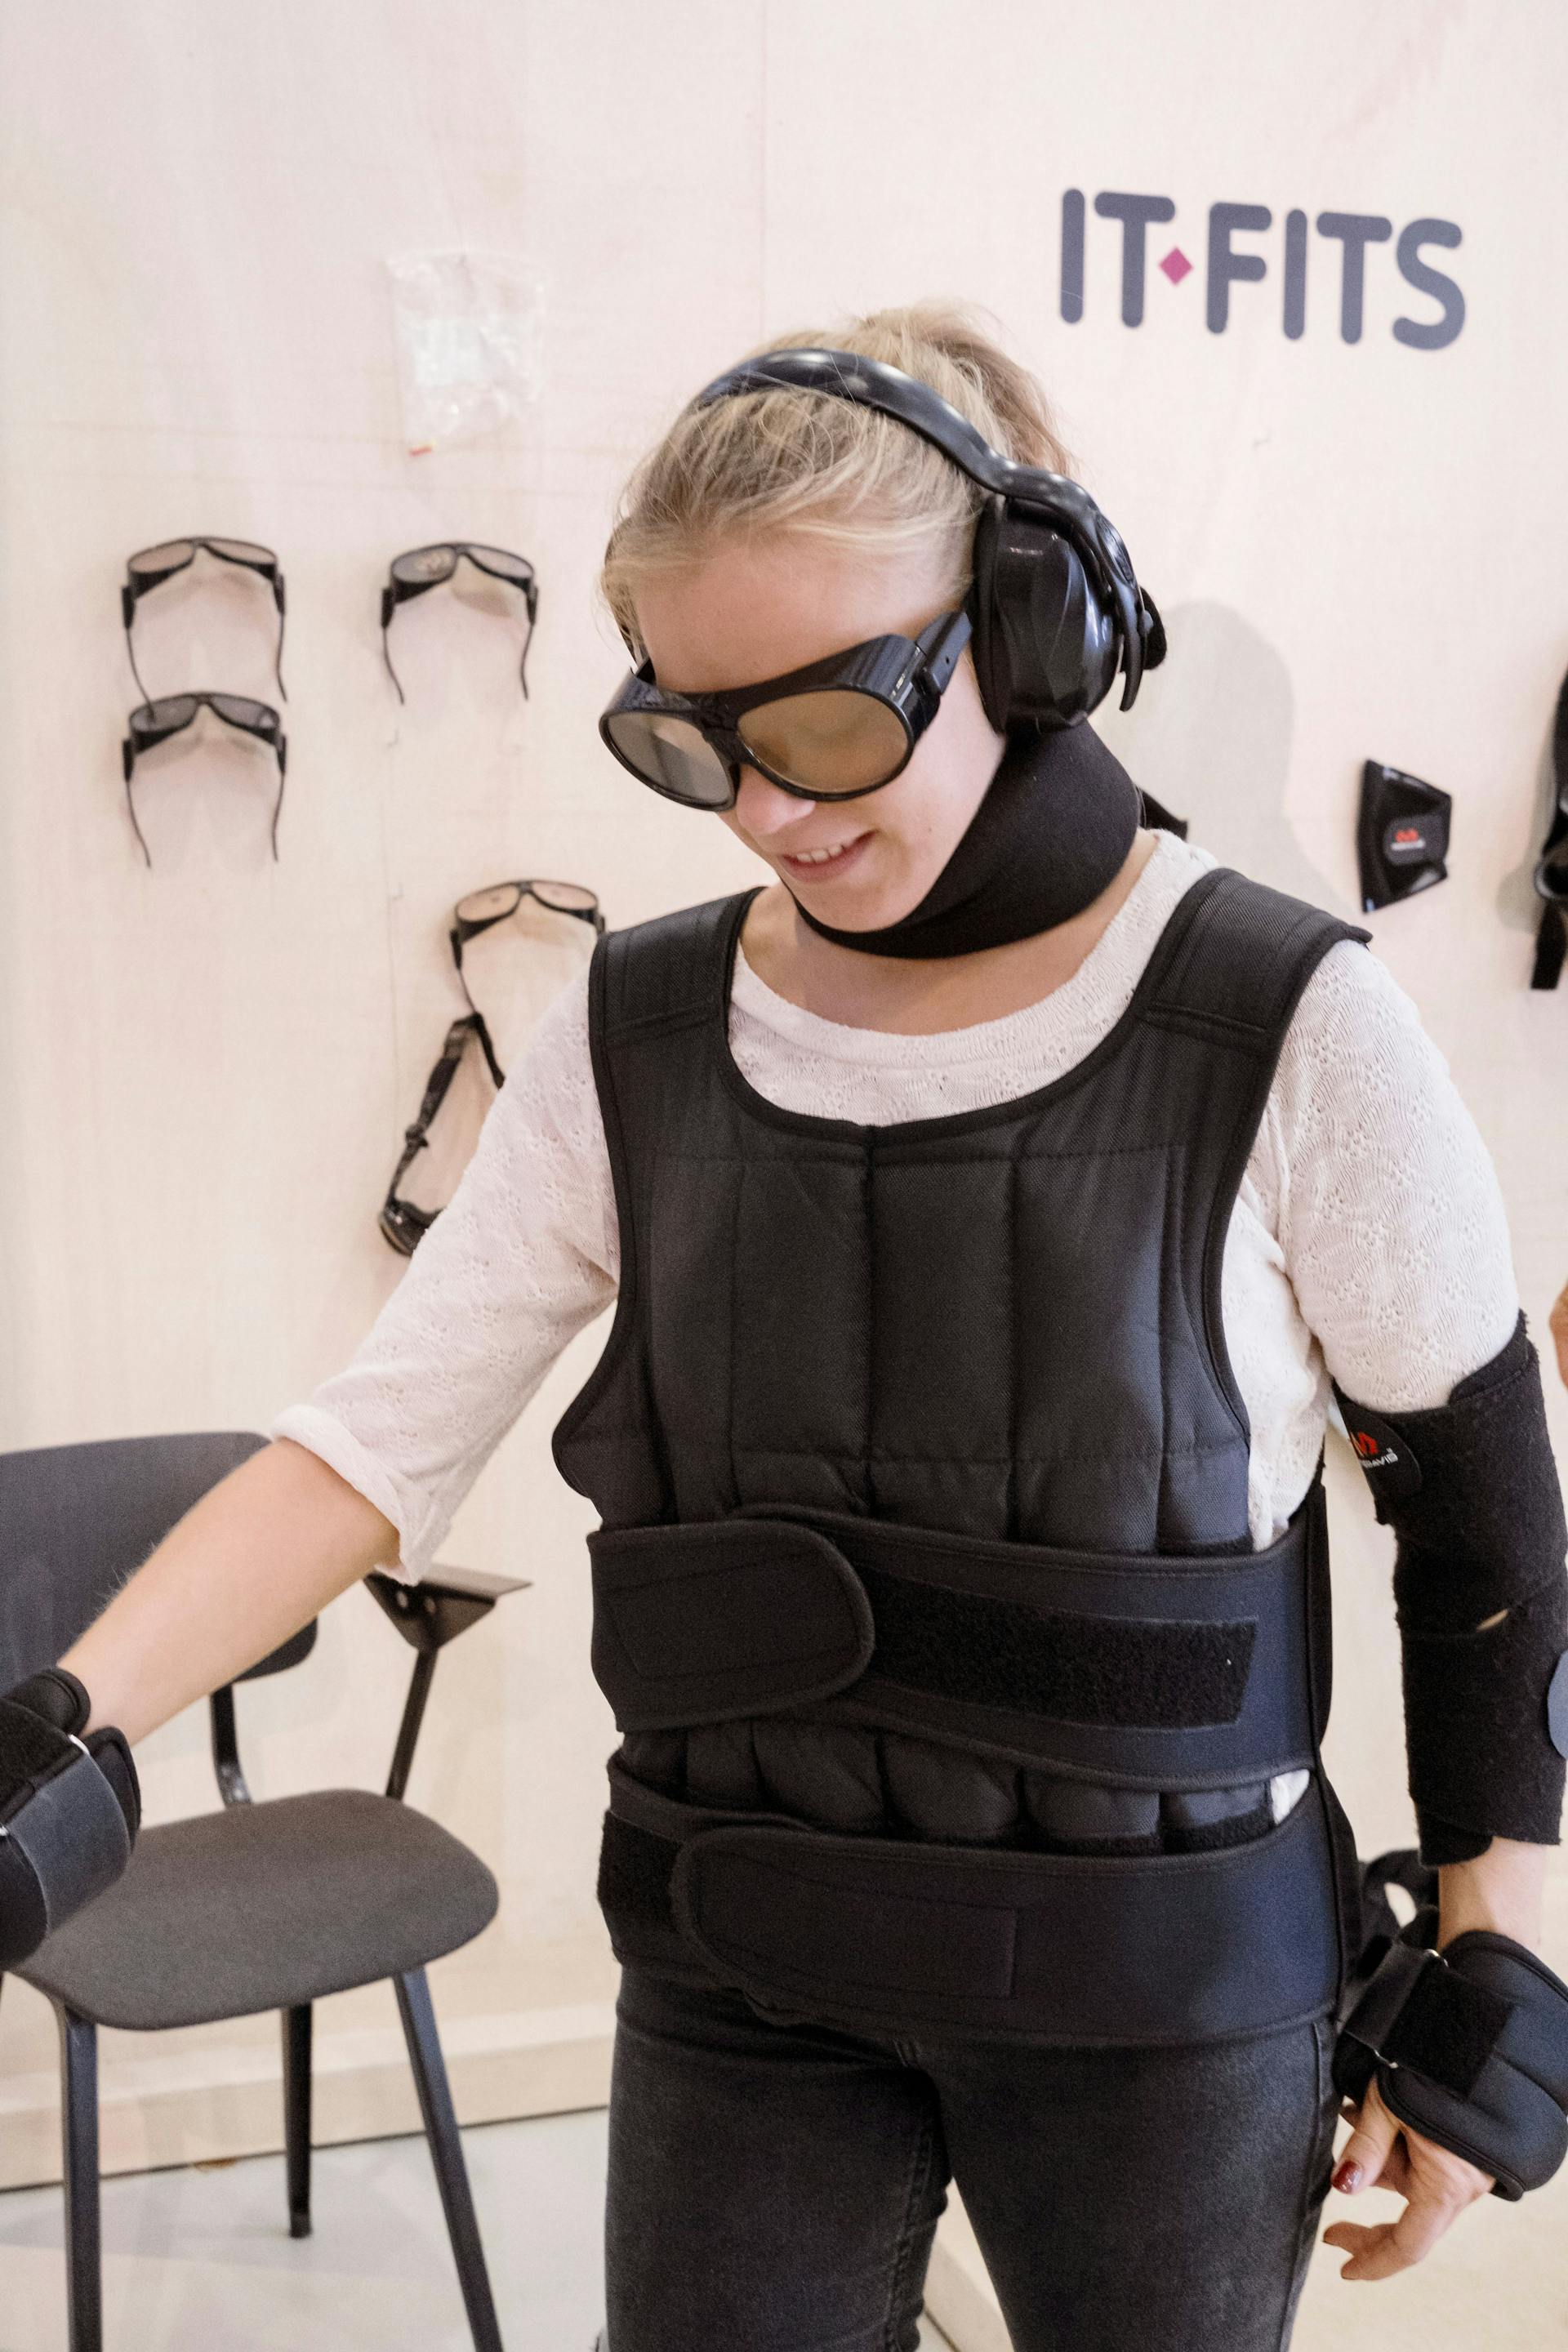 Simulation Suit: Experience what it is like to age, photo Johannes Schwartz 